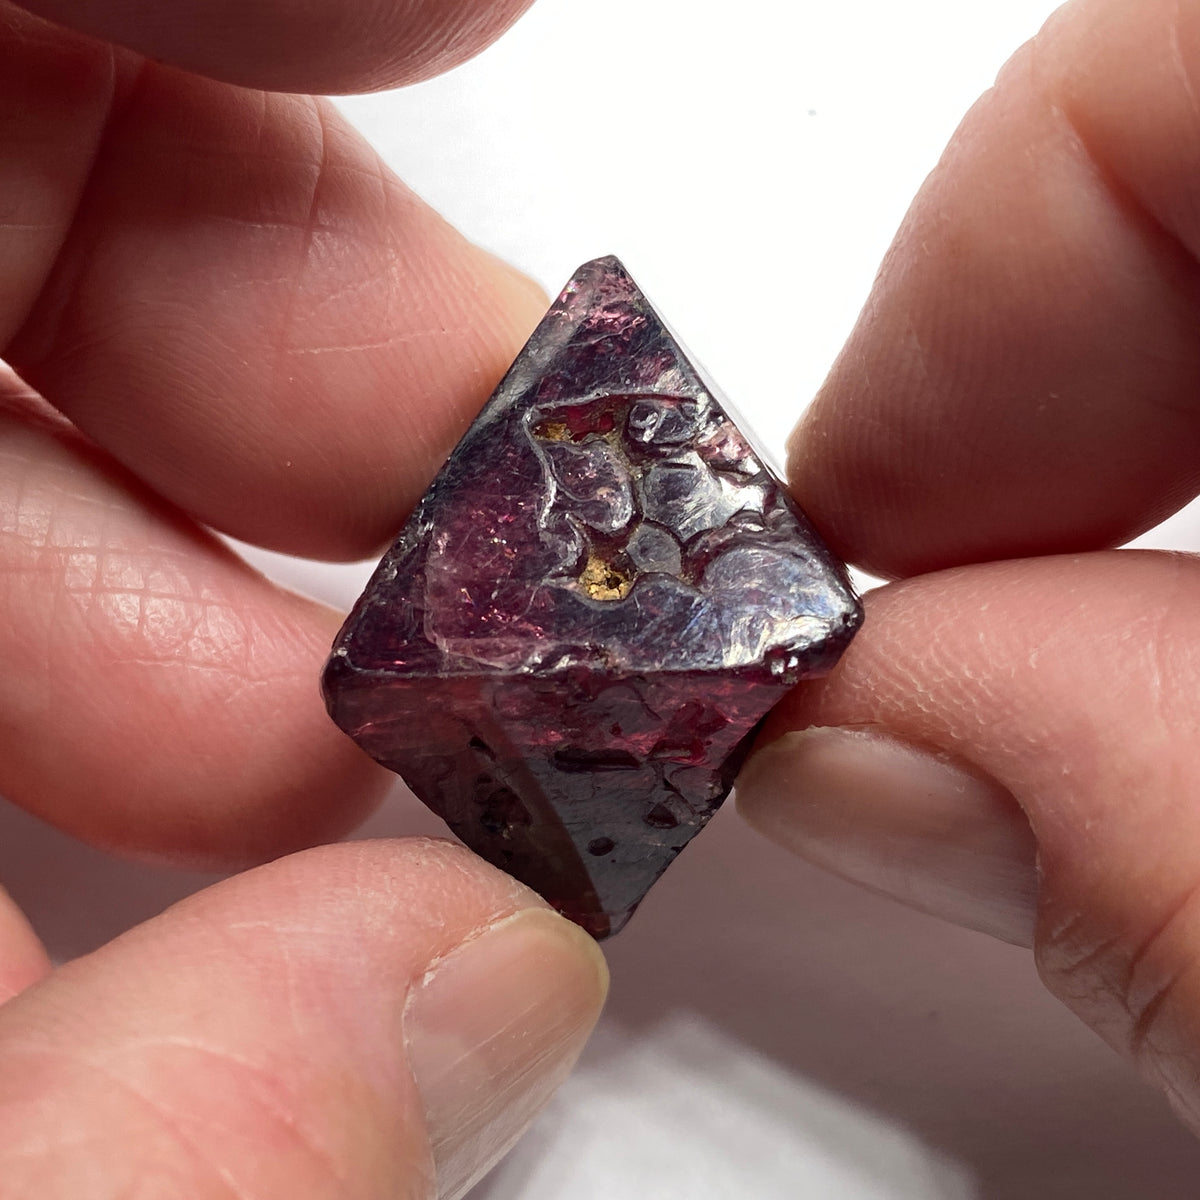 Red Spinel Crystal